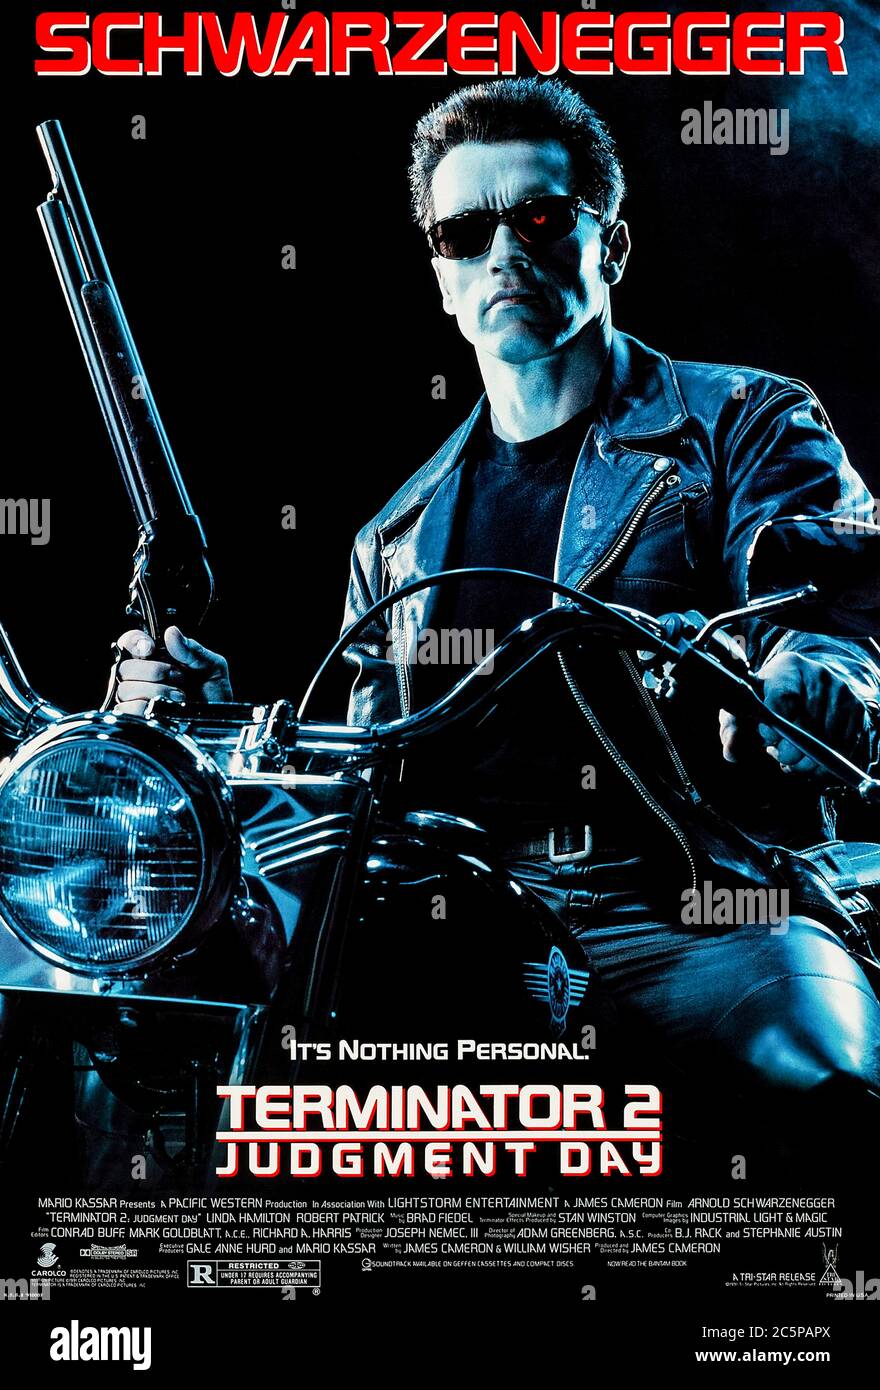 Terminator 2: Judgment Day (1991) directed by James Cameron and starring Arnold Schwarzenegger, Linda Hamilton, Edward Furlon and Robert Patrick. Innovative sequel where the Skynet supercomputer tries to kill a future resistant leader whilst he is still a child. Stock Photo